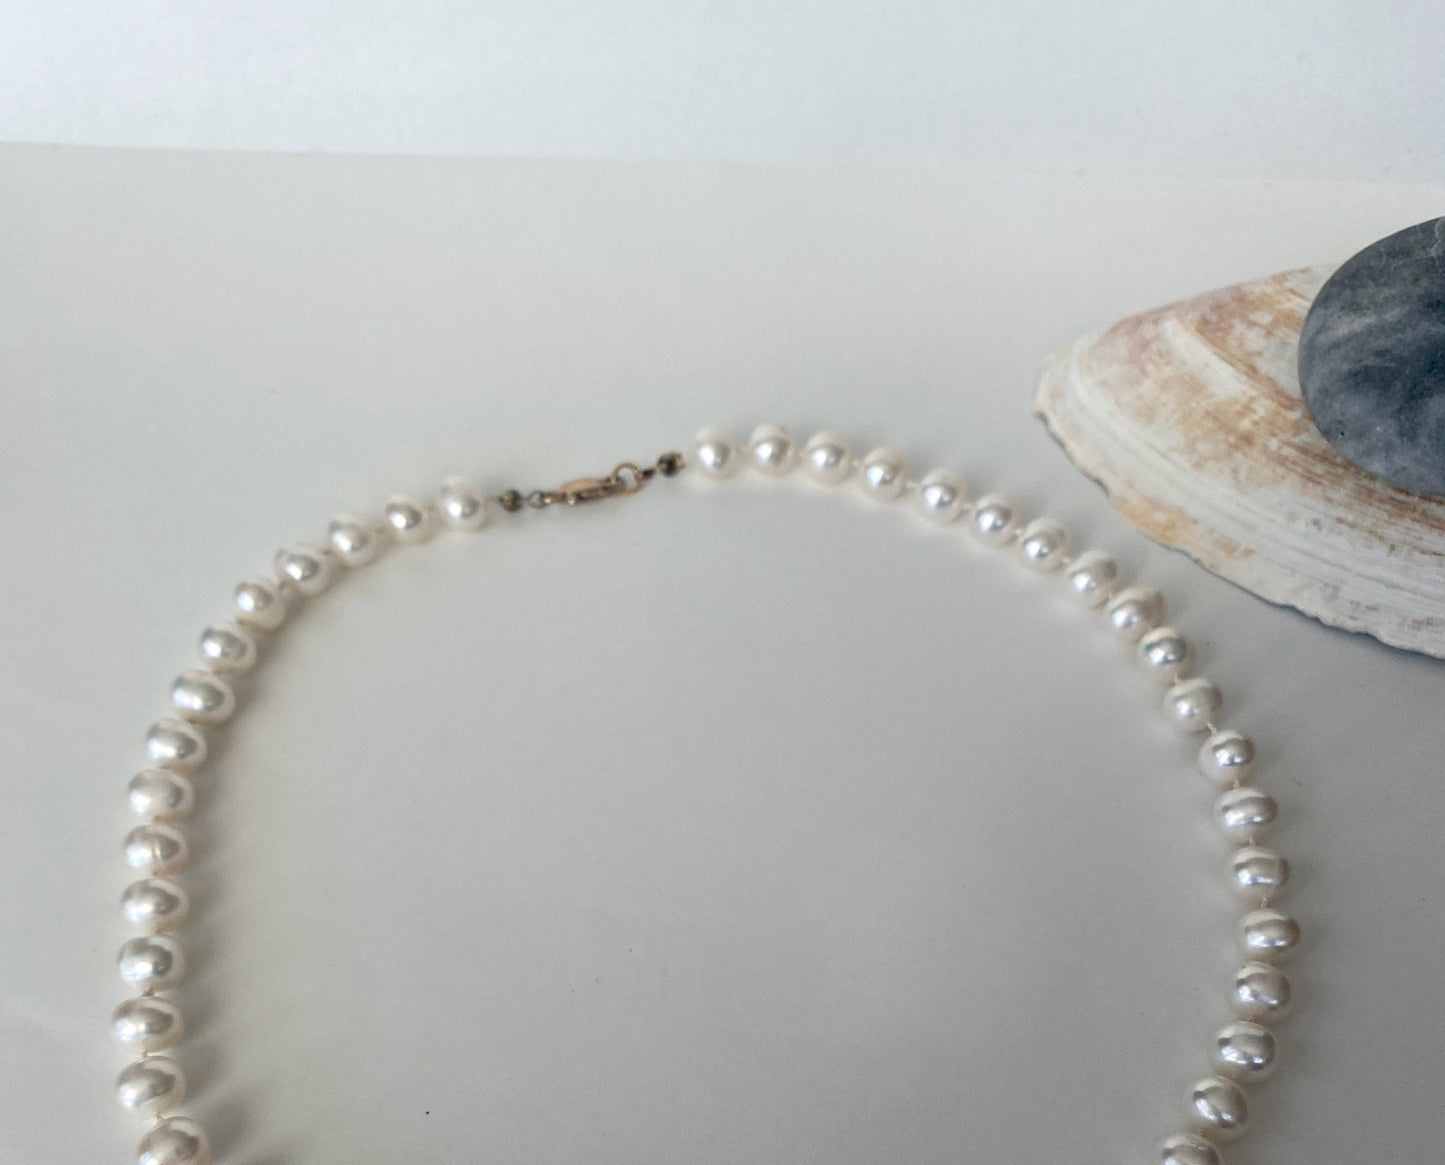 Gorgeous soft white knotted fresh water pearl necklace. The necklace is finished with a quality gold filled lobster clasp.